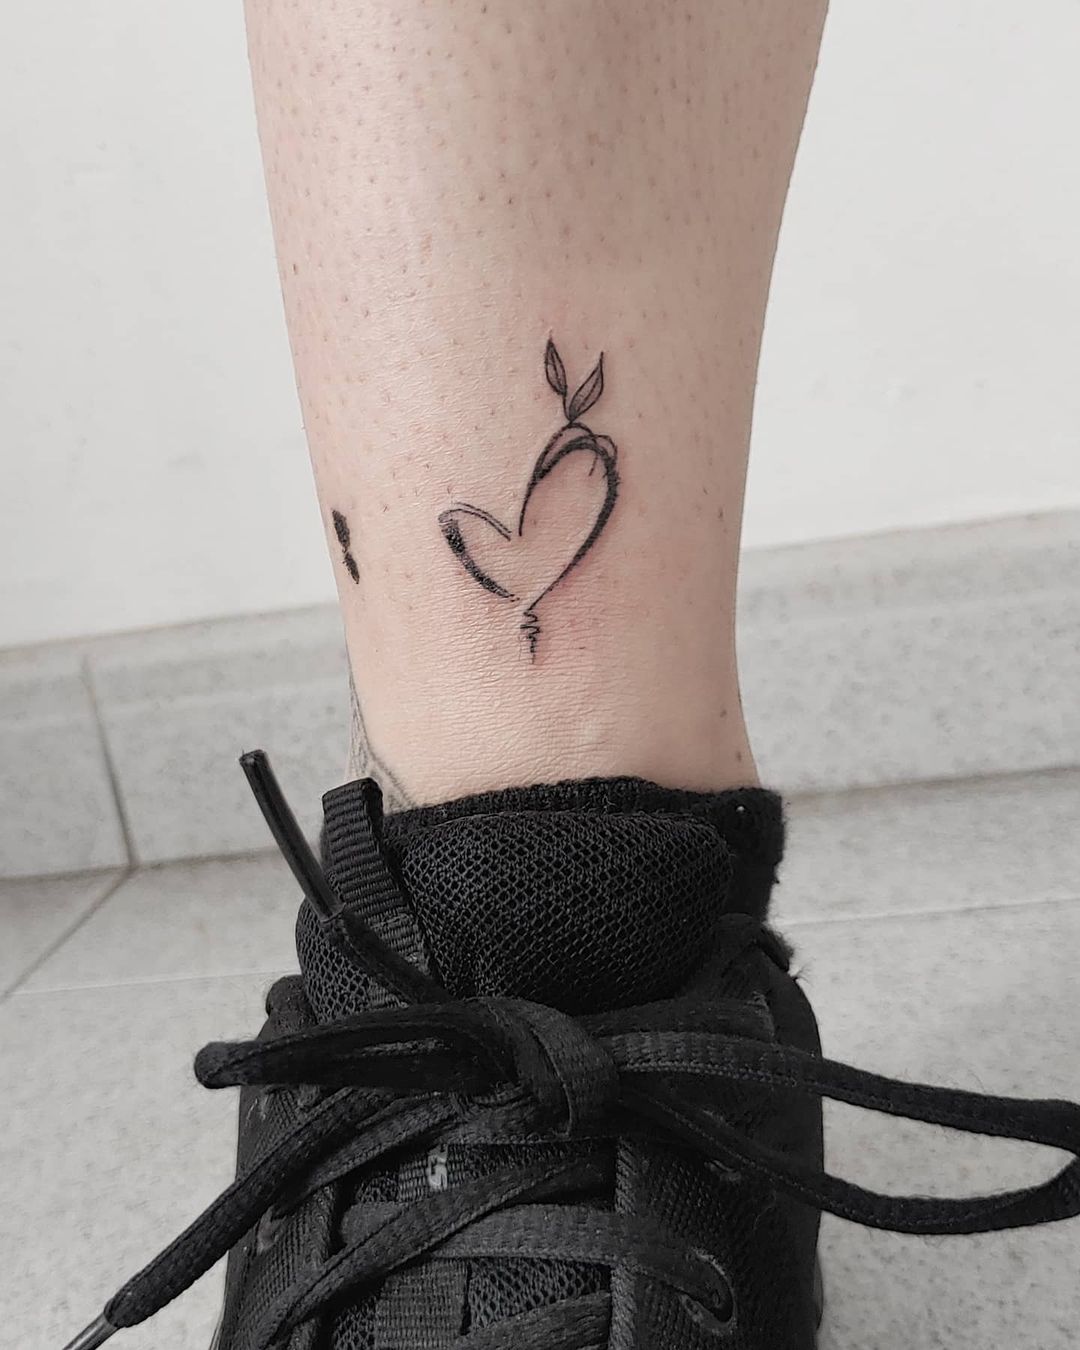 84 Cute and Inspiring Heart Tattoos With Meaning